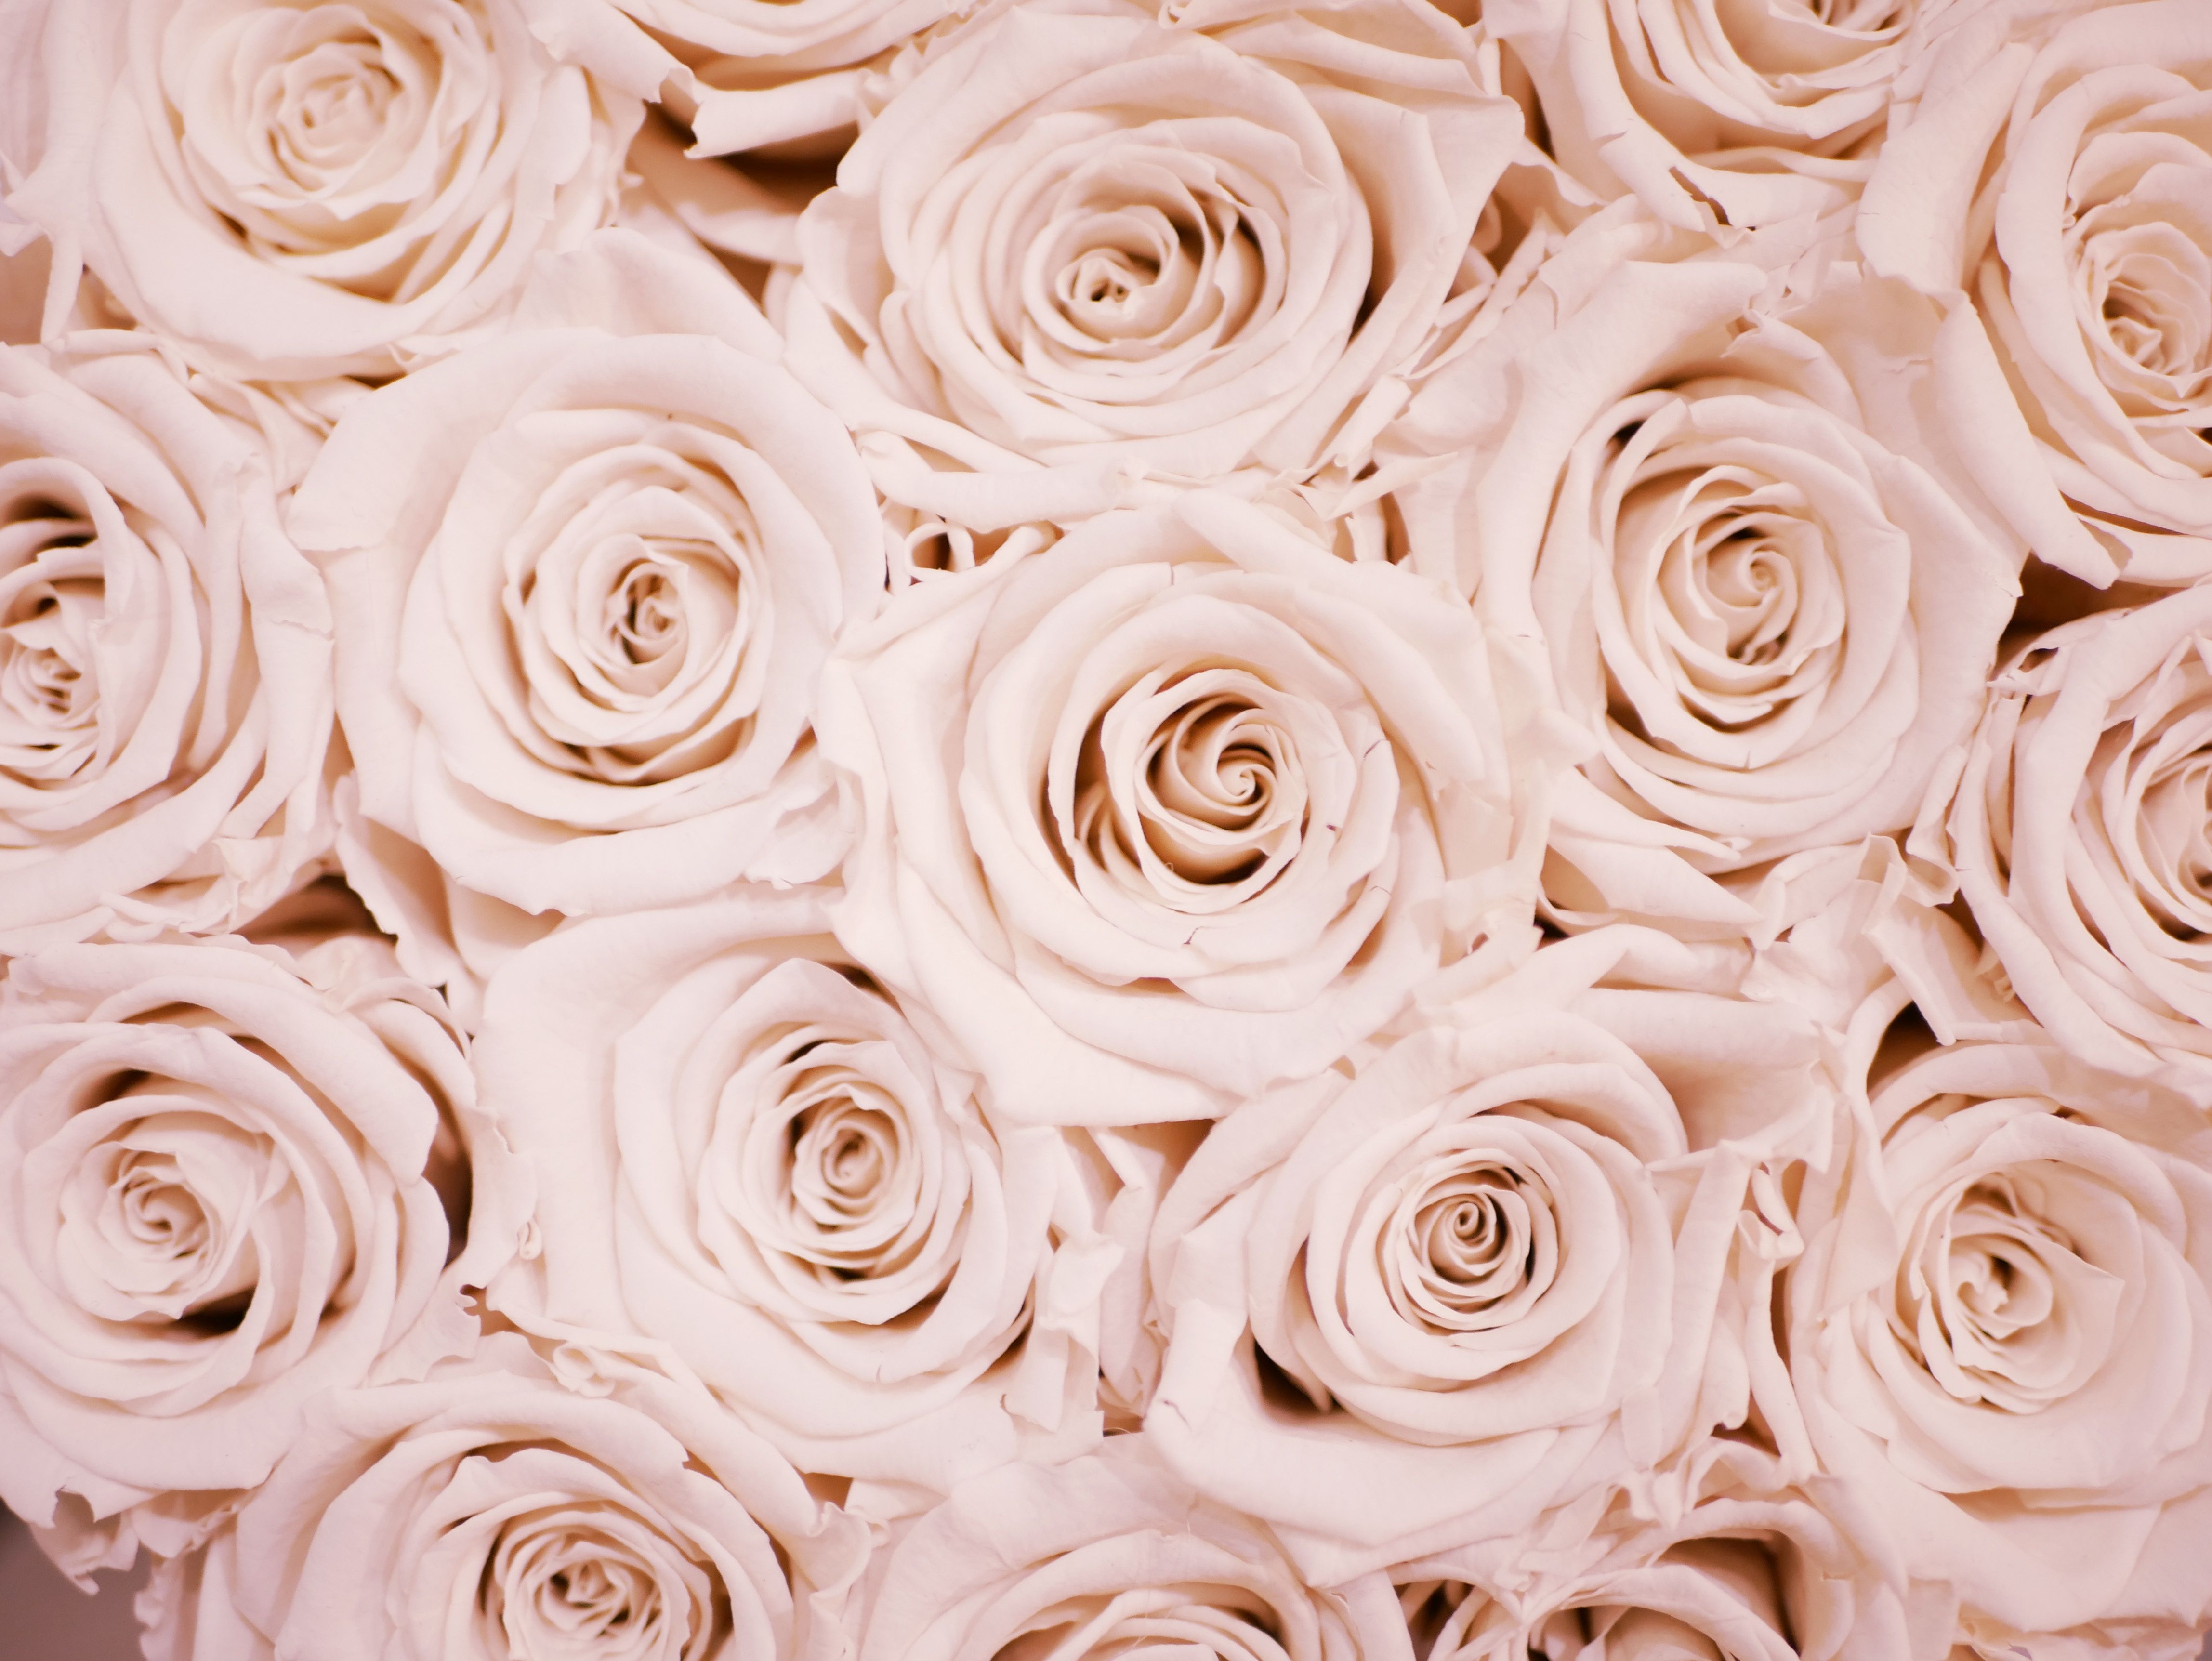 A close up of many white roses - Chromebook, rose gold, flower, blush, roses